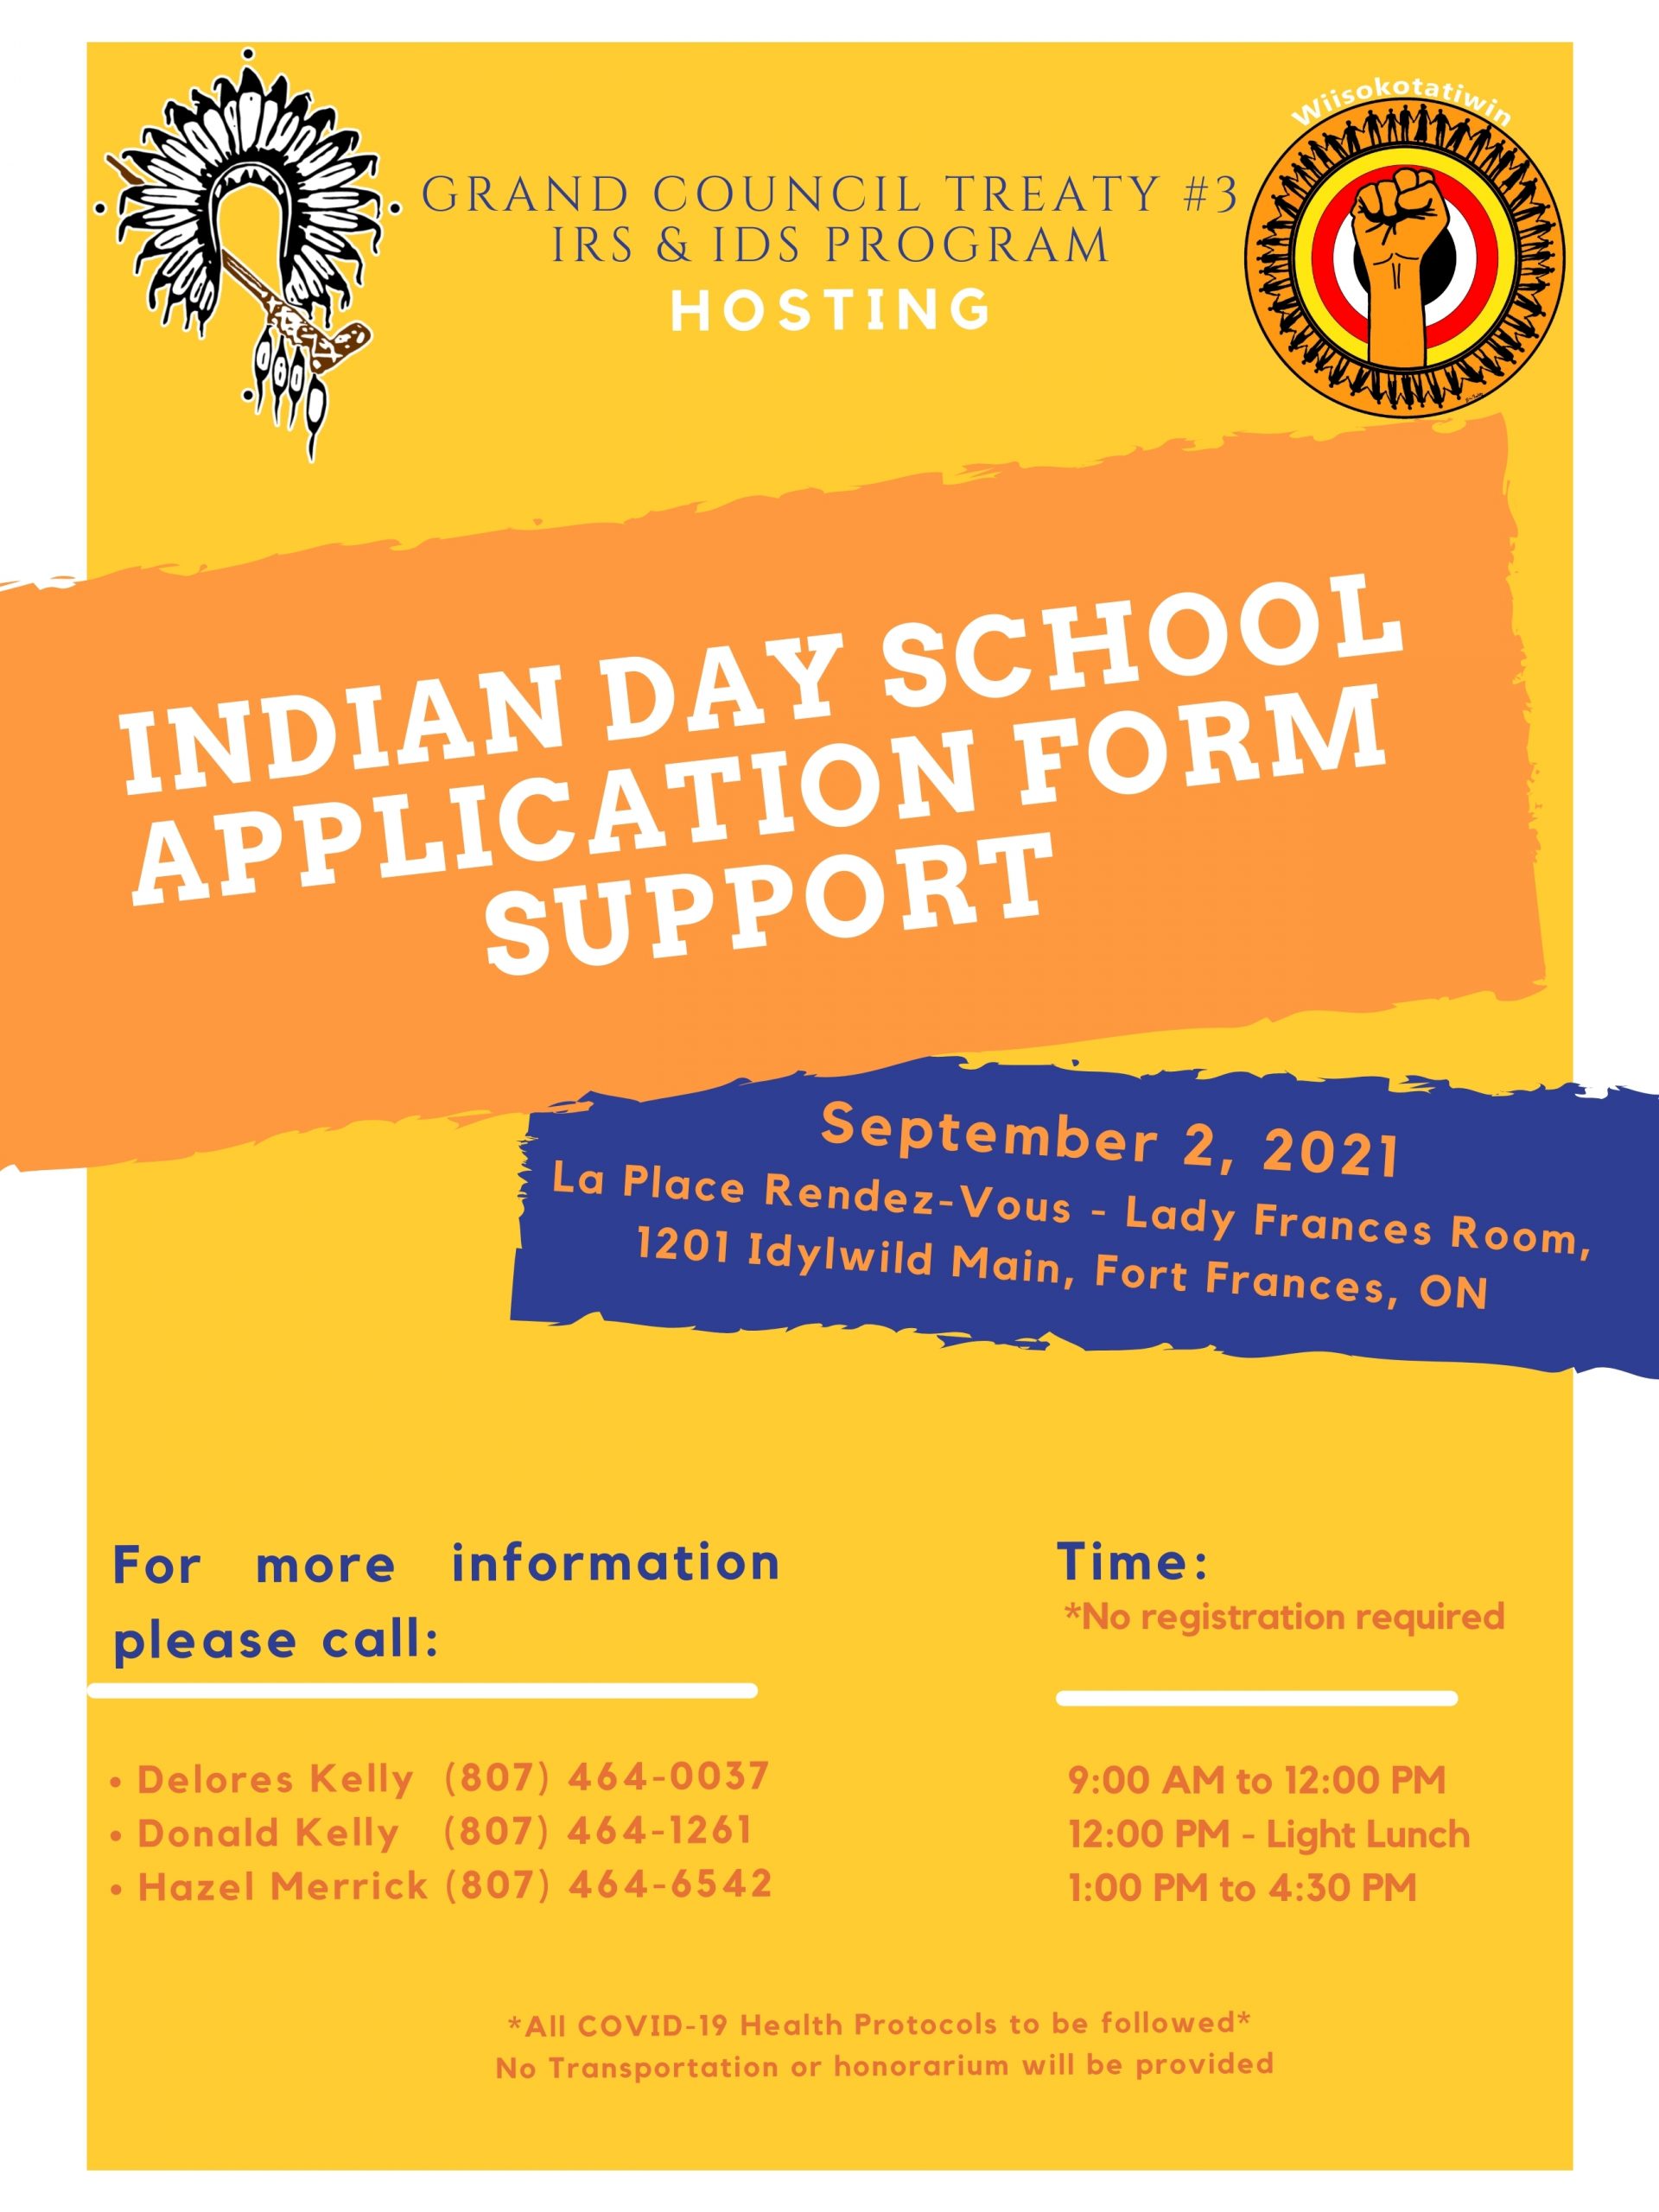 Indian Day School Application Form Support